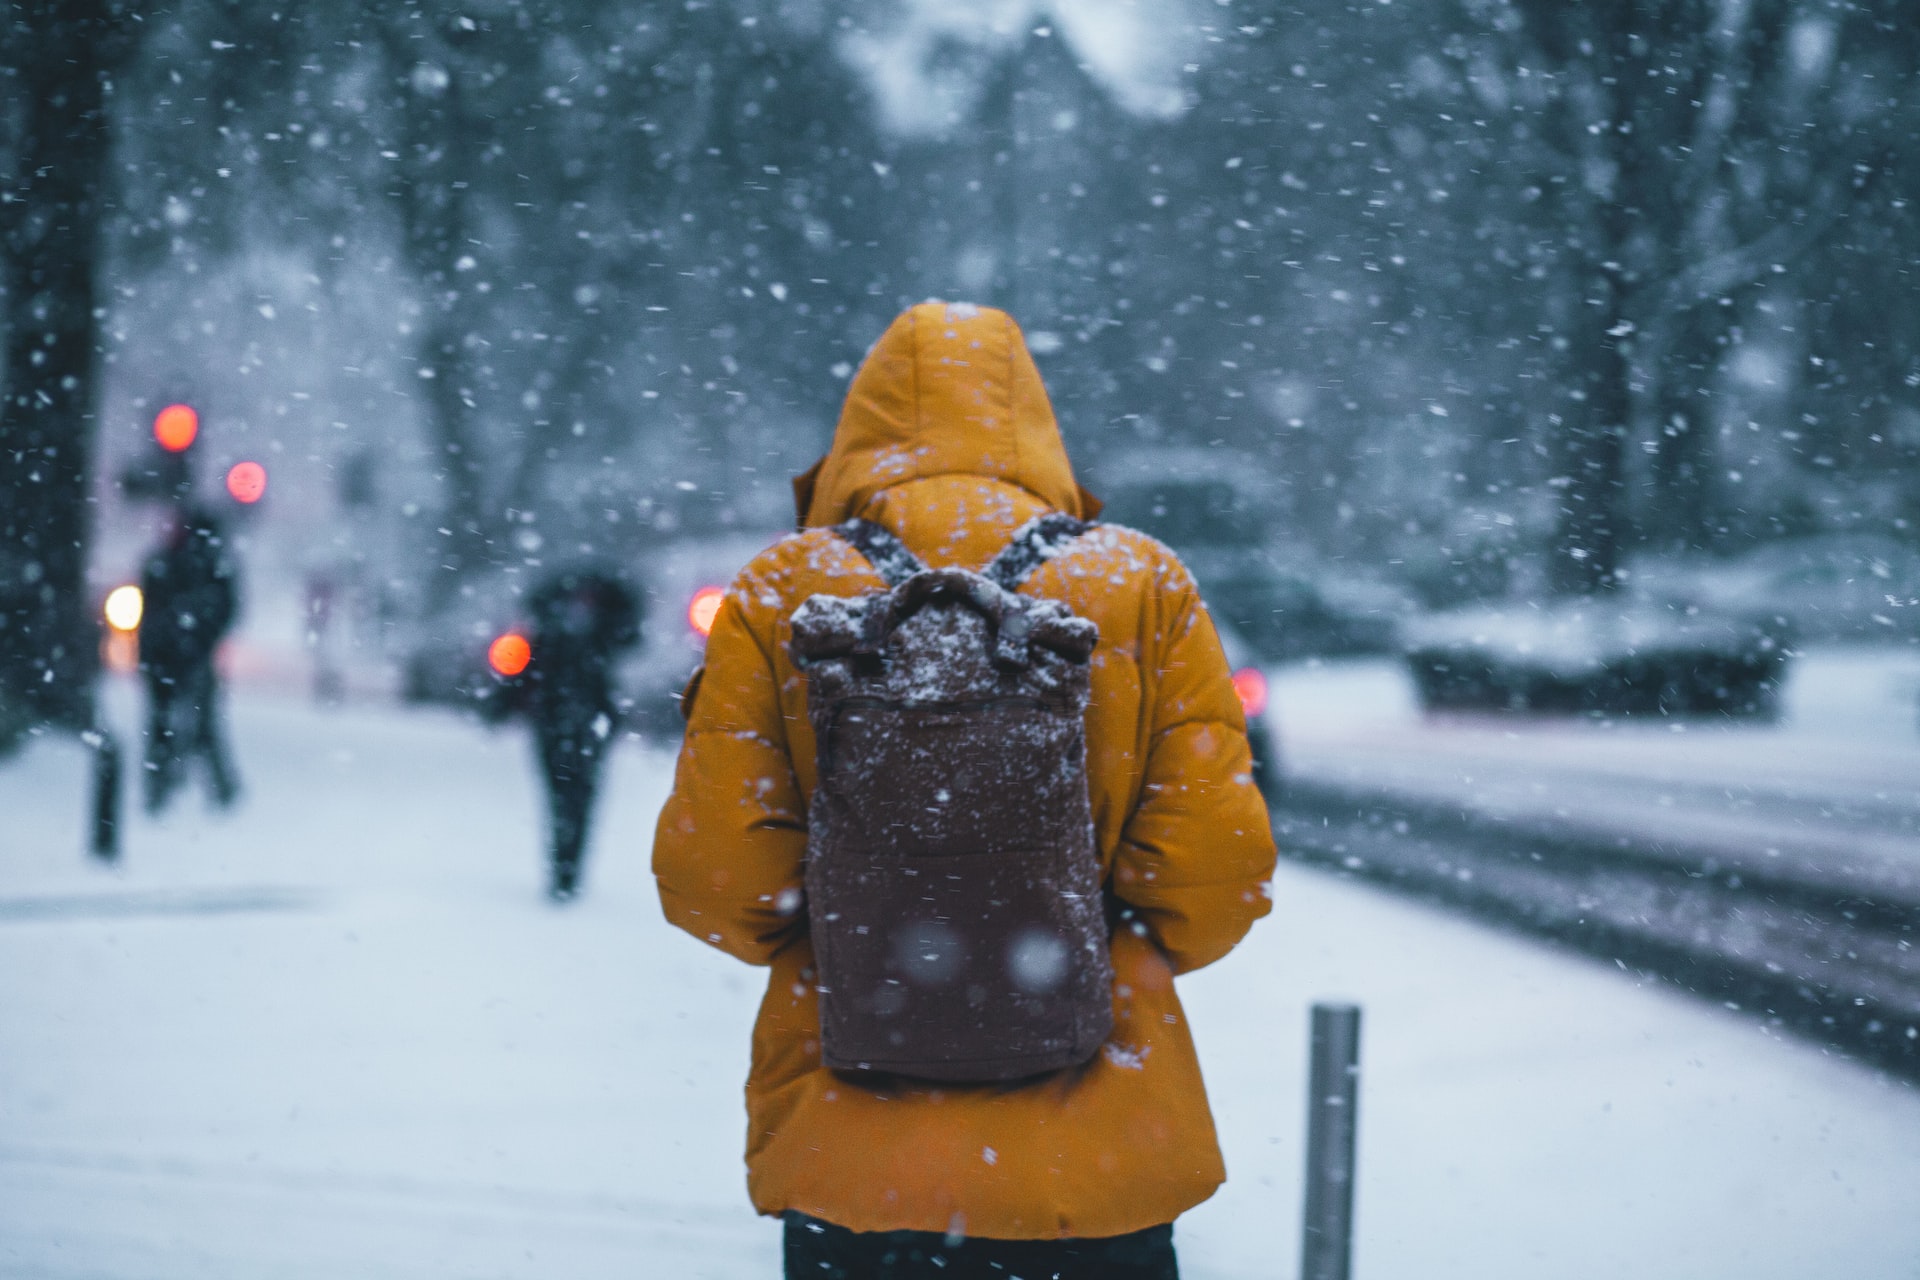 A person with a winter coat and backpack walks near a street through snowy weather